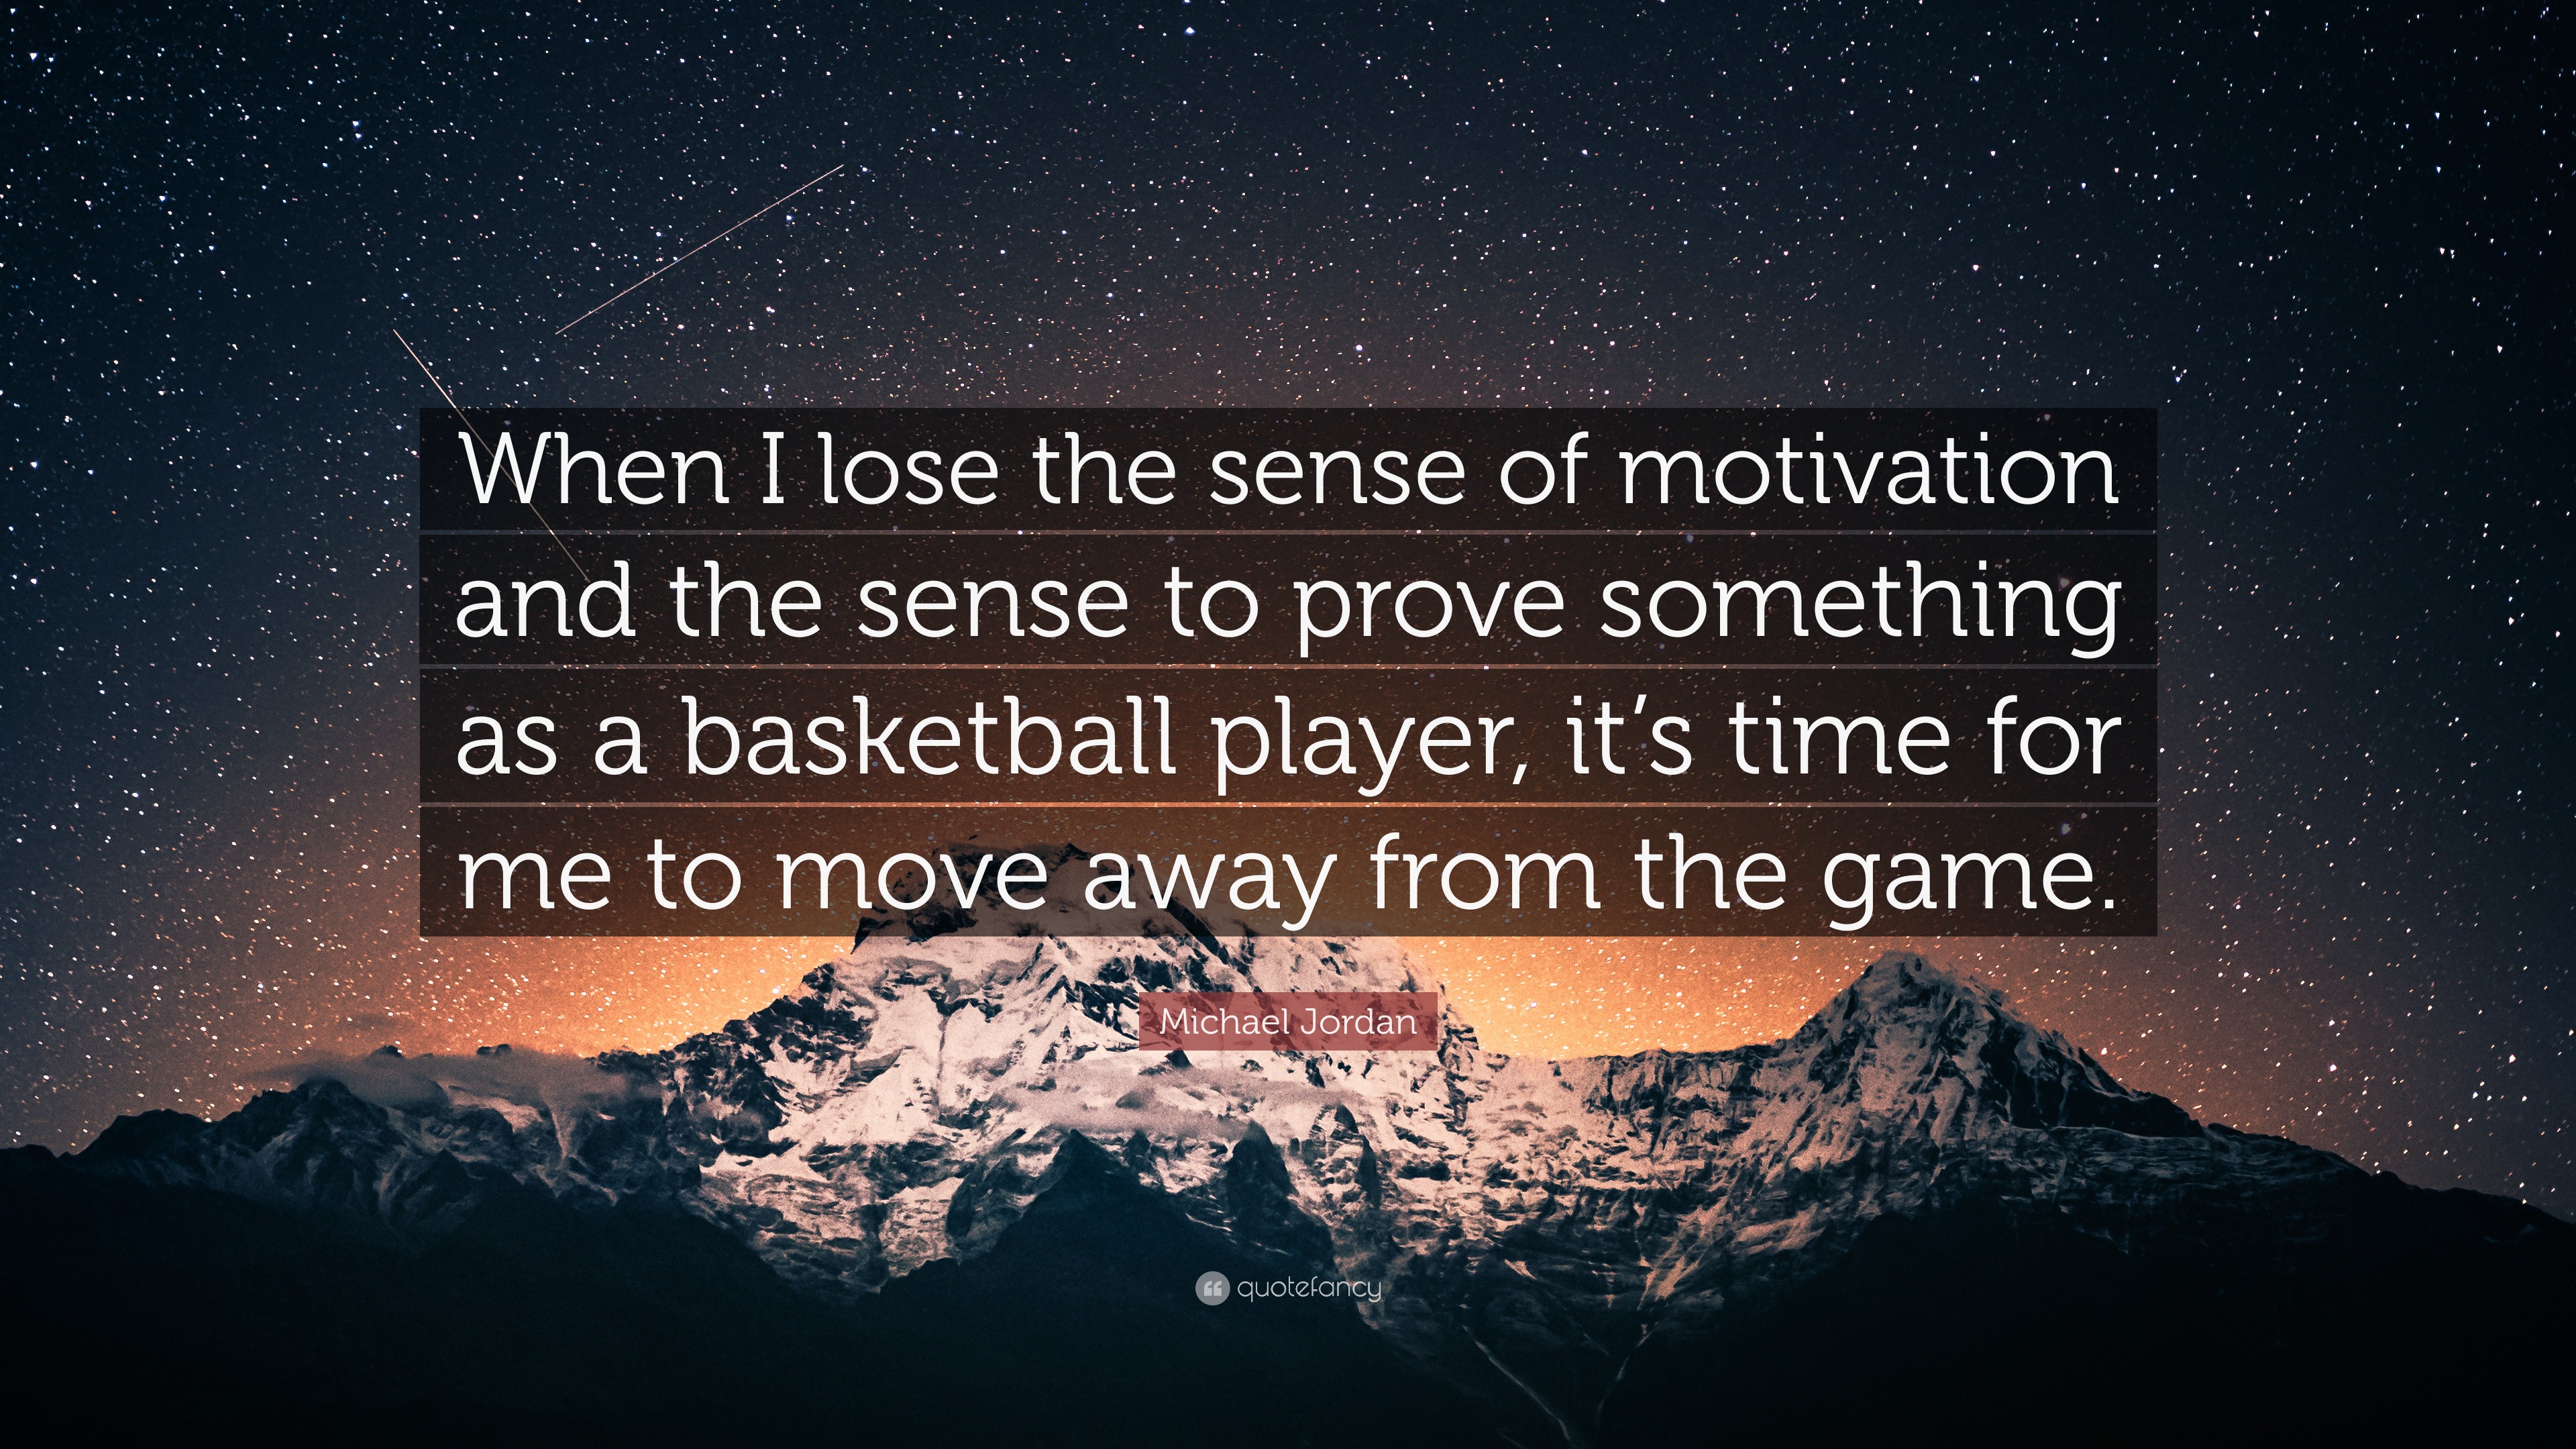 Michael Jordan Quote: “When I the sense of motivation and the sense to prove something as basketball player, it's time for me to aw...”